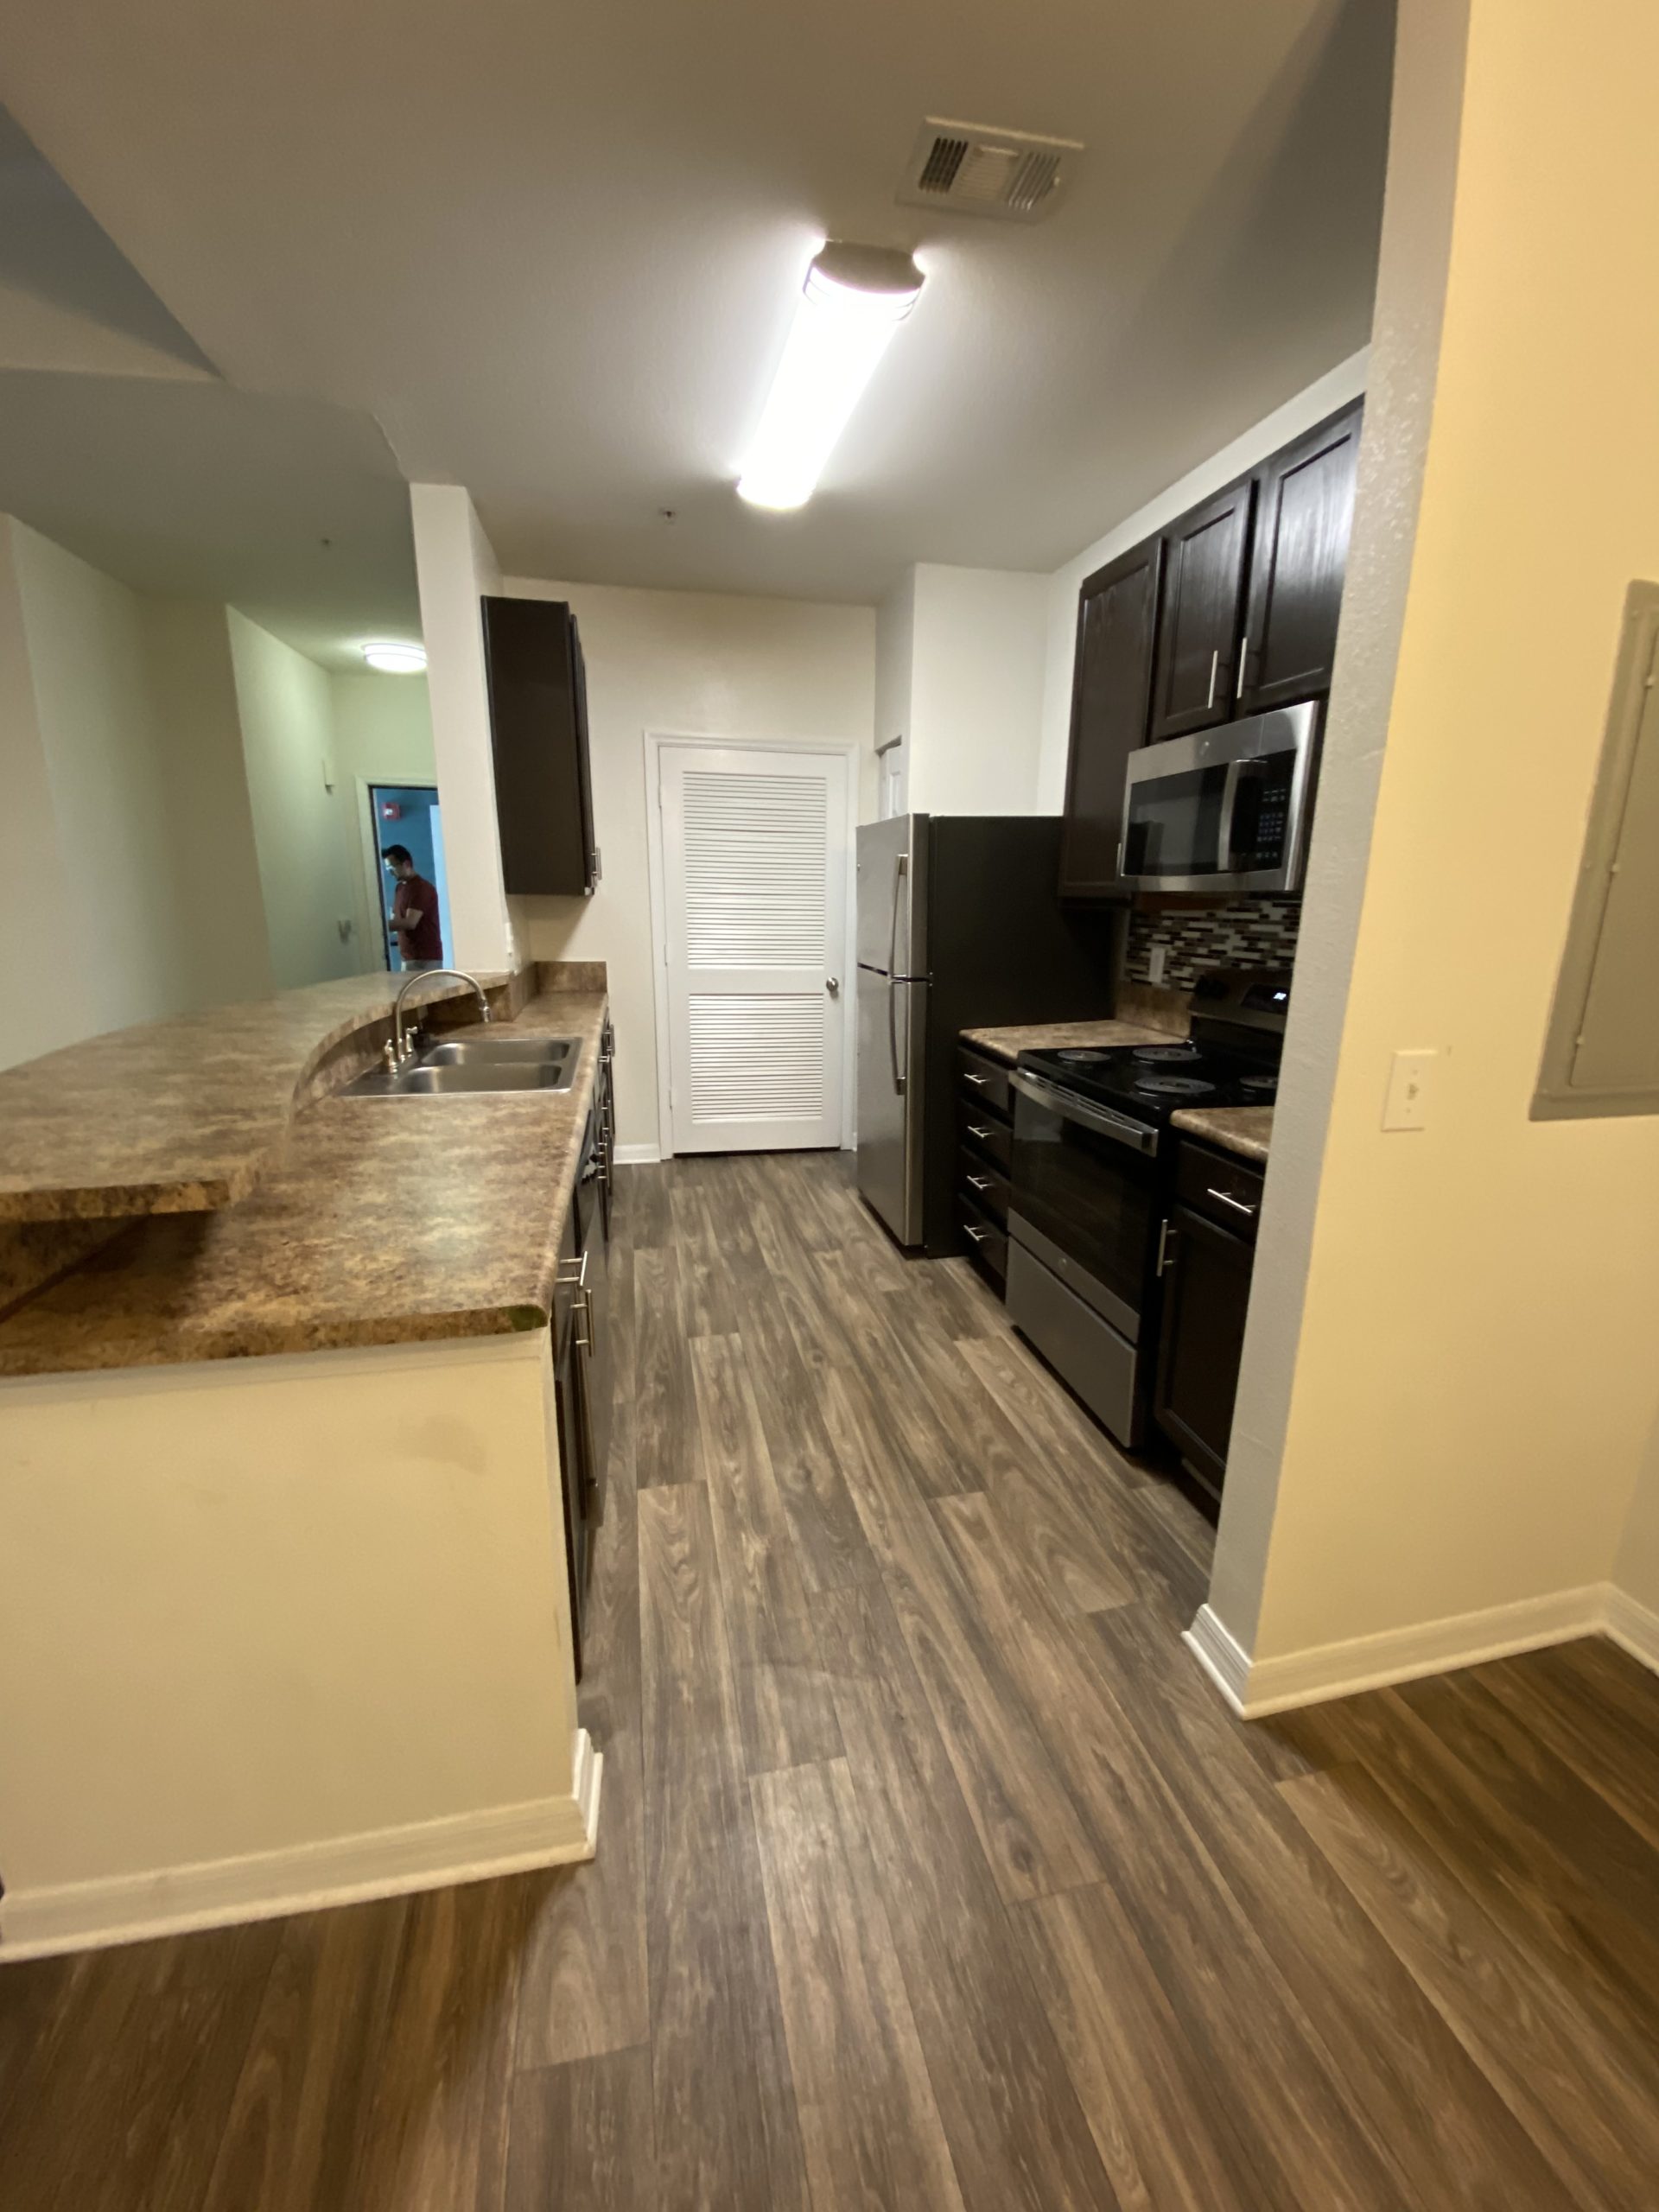 Sublease 3bed 2bath Apartment